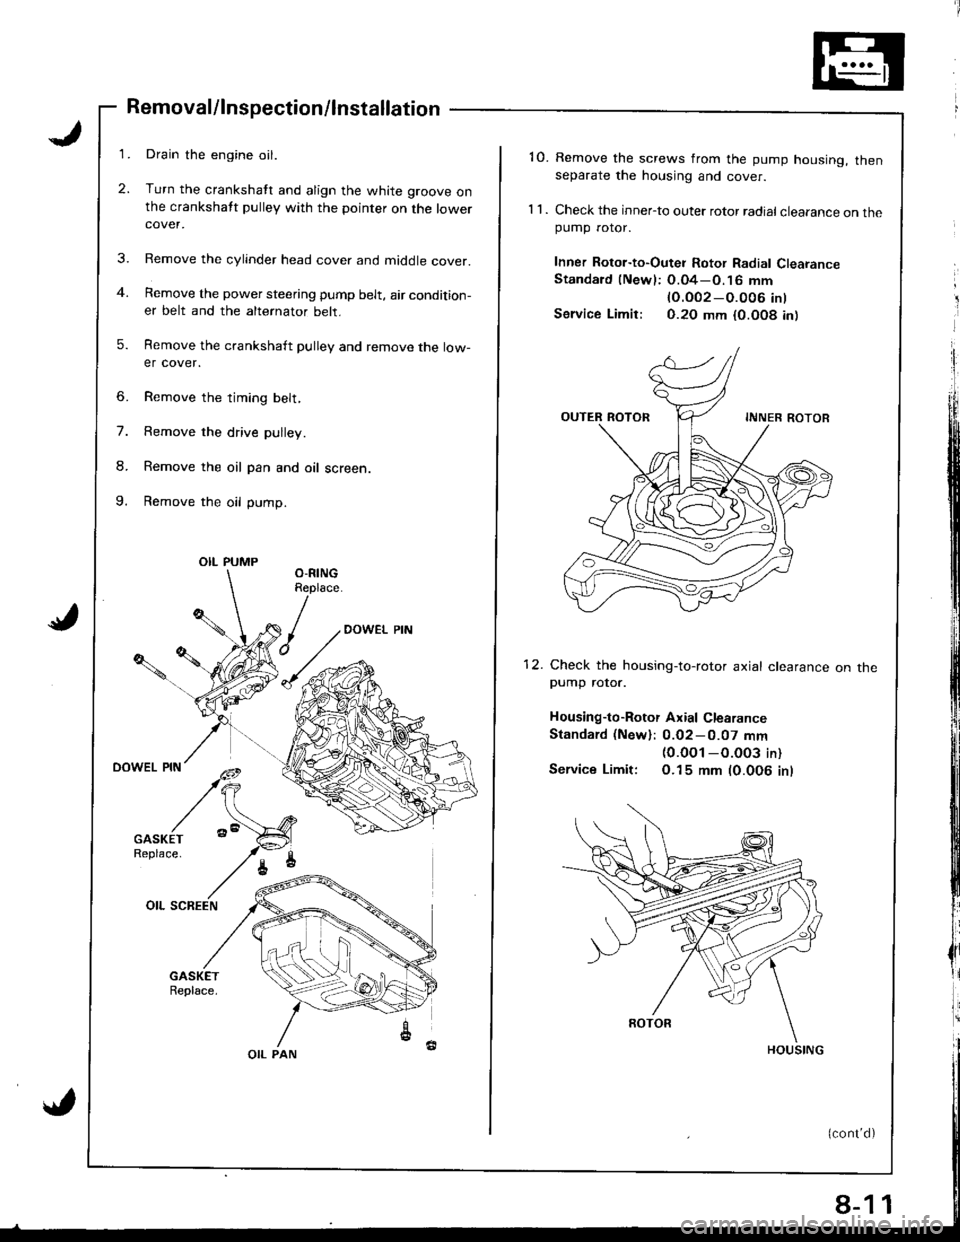 HONDA INTEGRA 1998 4.G Owners Guide 3.
Removal/lnspection/lnstallation
Drain the engine oil.
Turn the crankshatt and align the white groove onthe crankshatt pulley with the pointer on the lowercover.
Remove the cylinder head cover and m